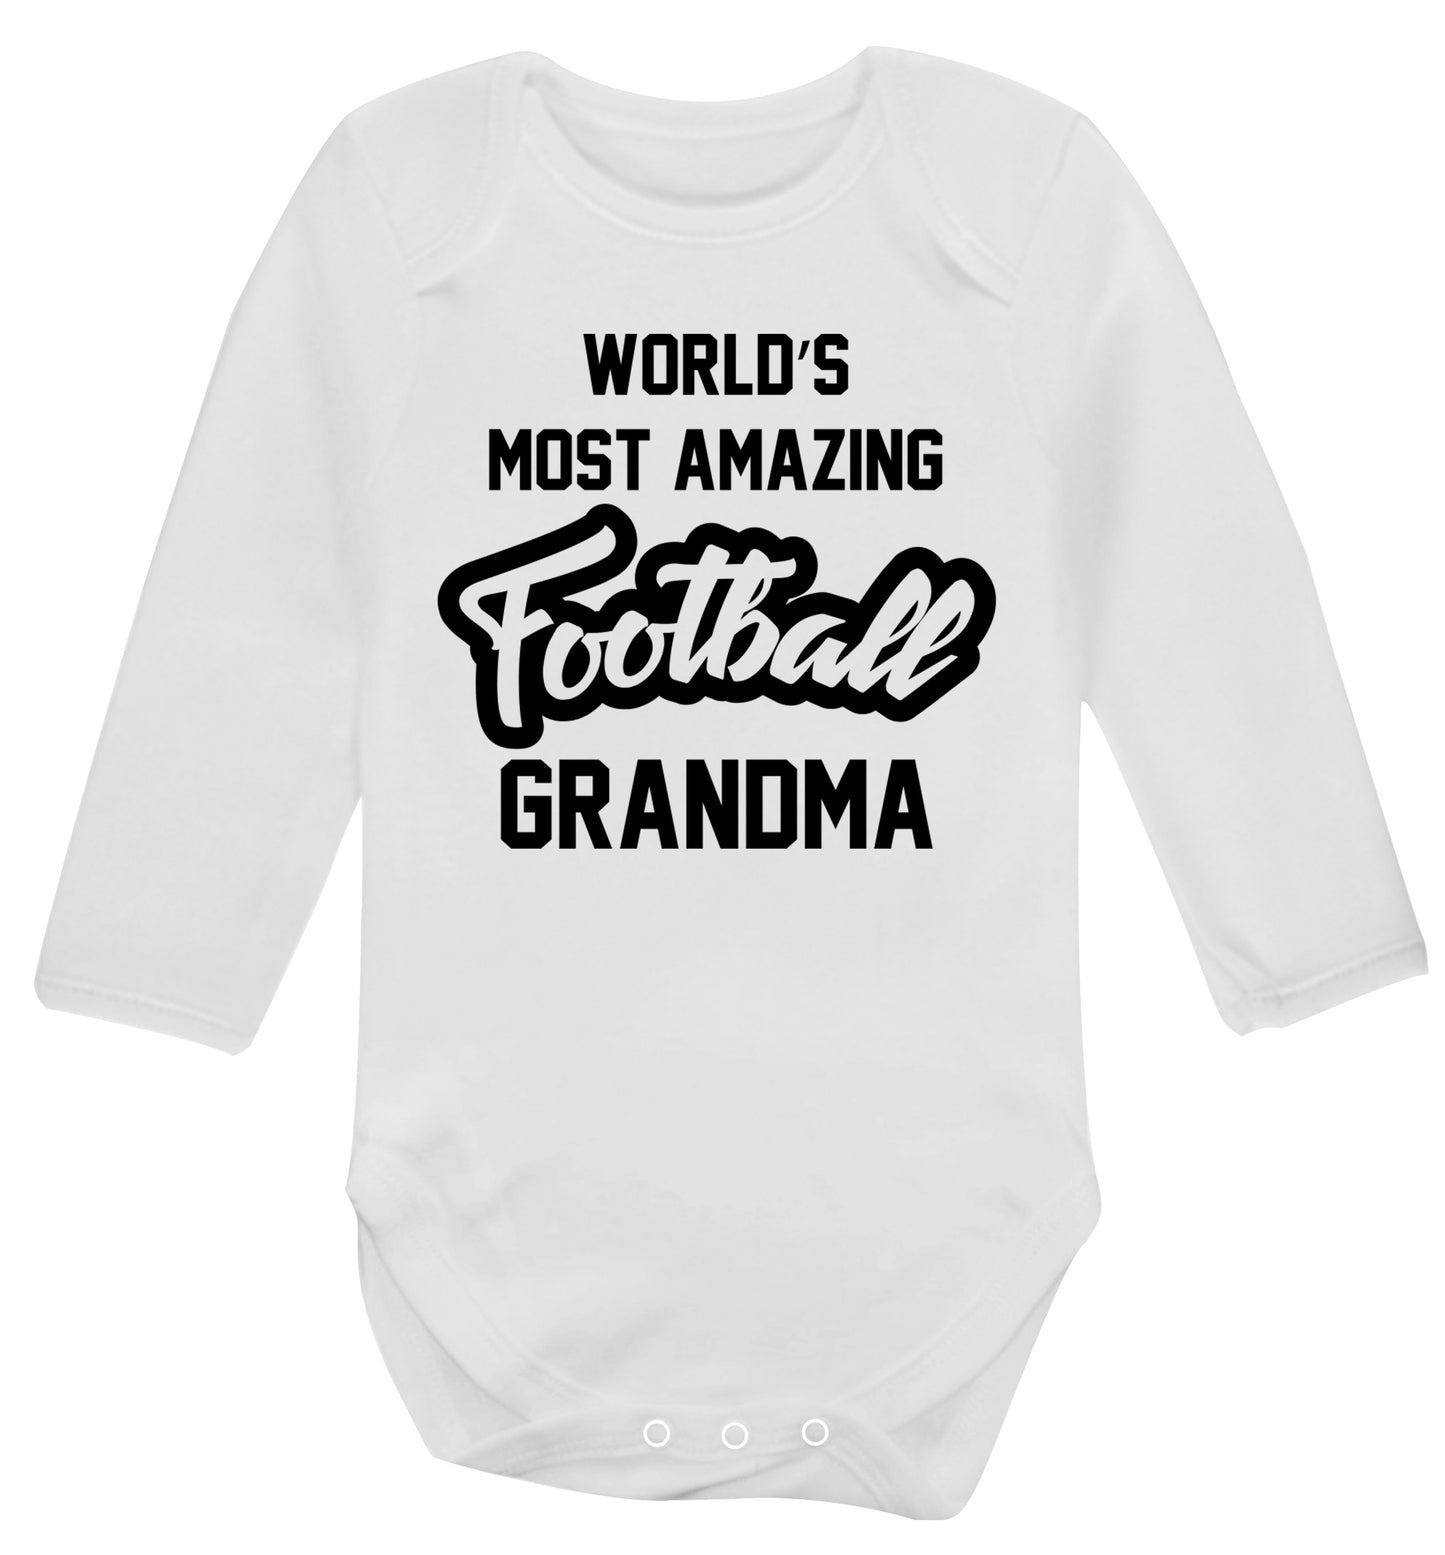 Worlds most amazing football grandma Baby Vest long sleeved white 6-12 months